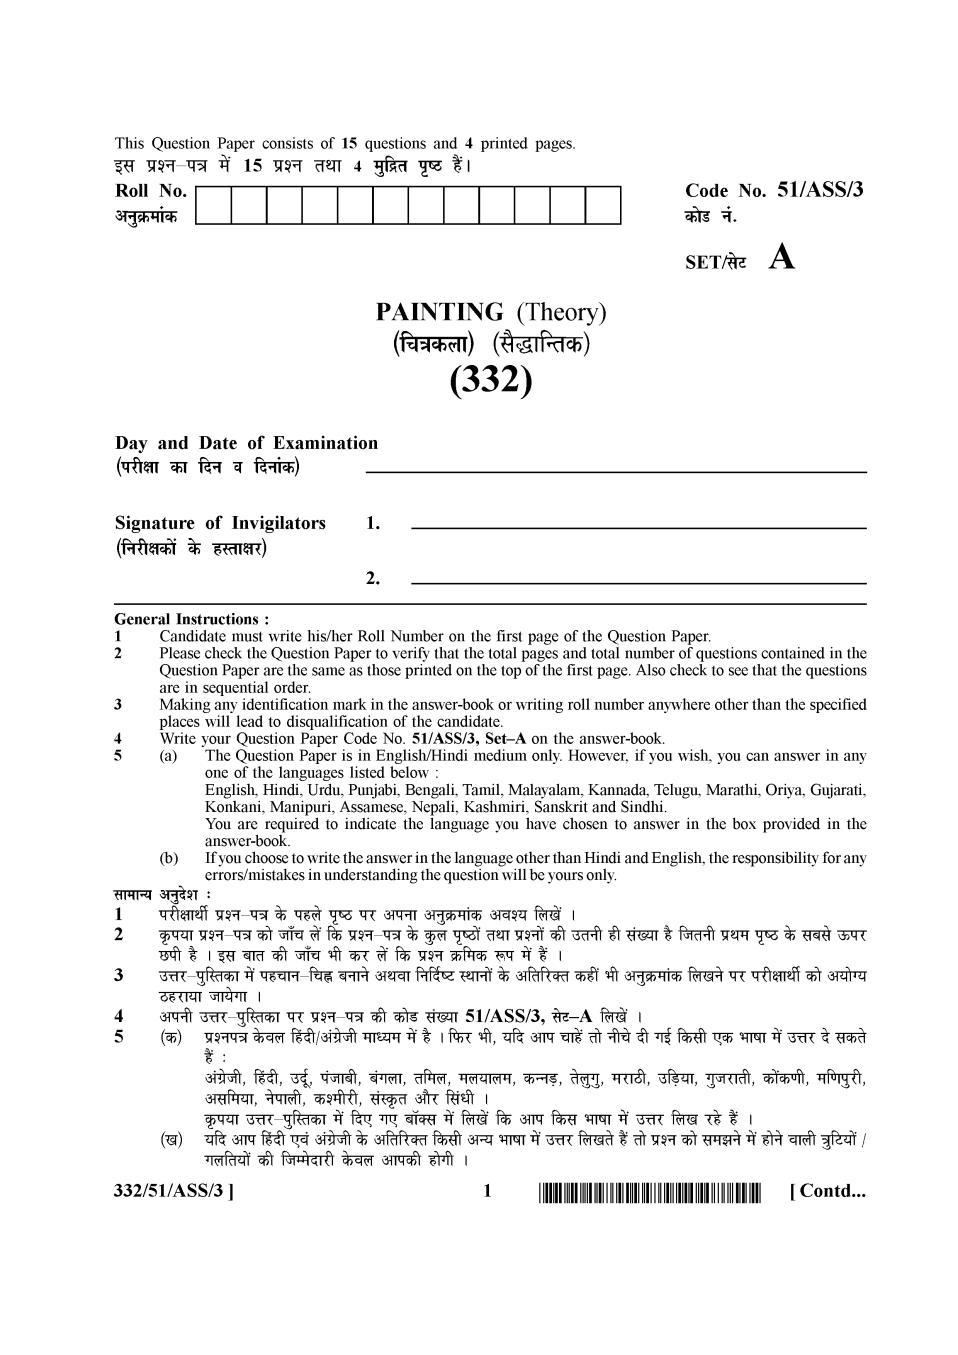 NIOS Class 12 Question Paper Oct 2015 - Painting Theory - Page 1